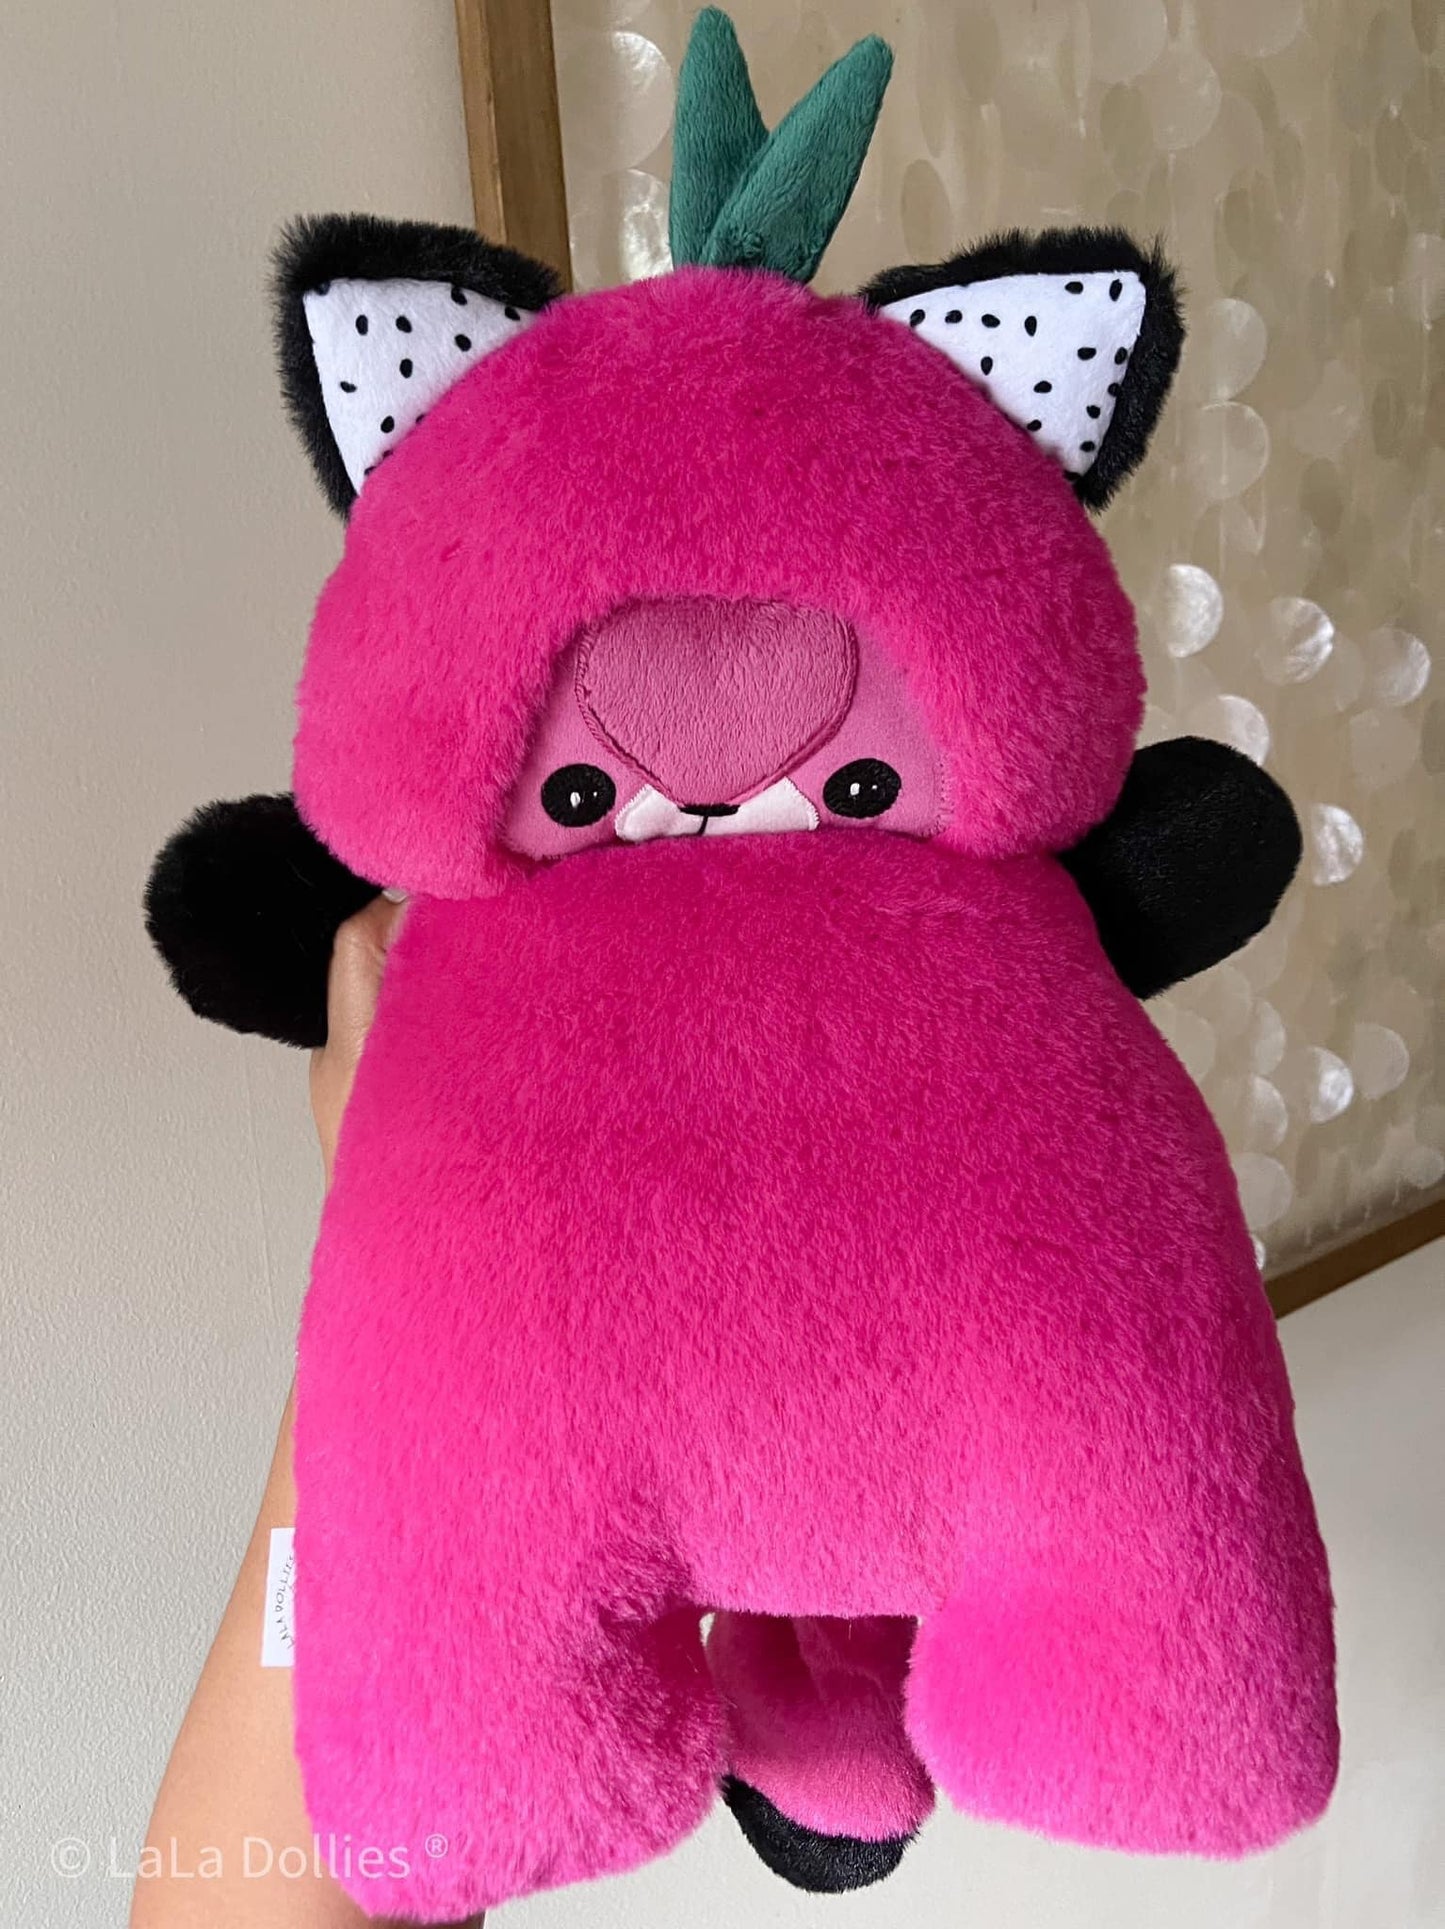 Dragonfruit Fox, Cerise and black seal minky | LALA DOLLIES ® Exclusive